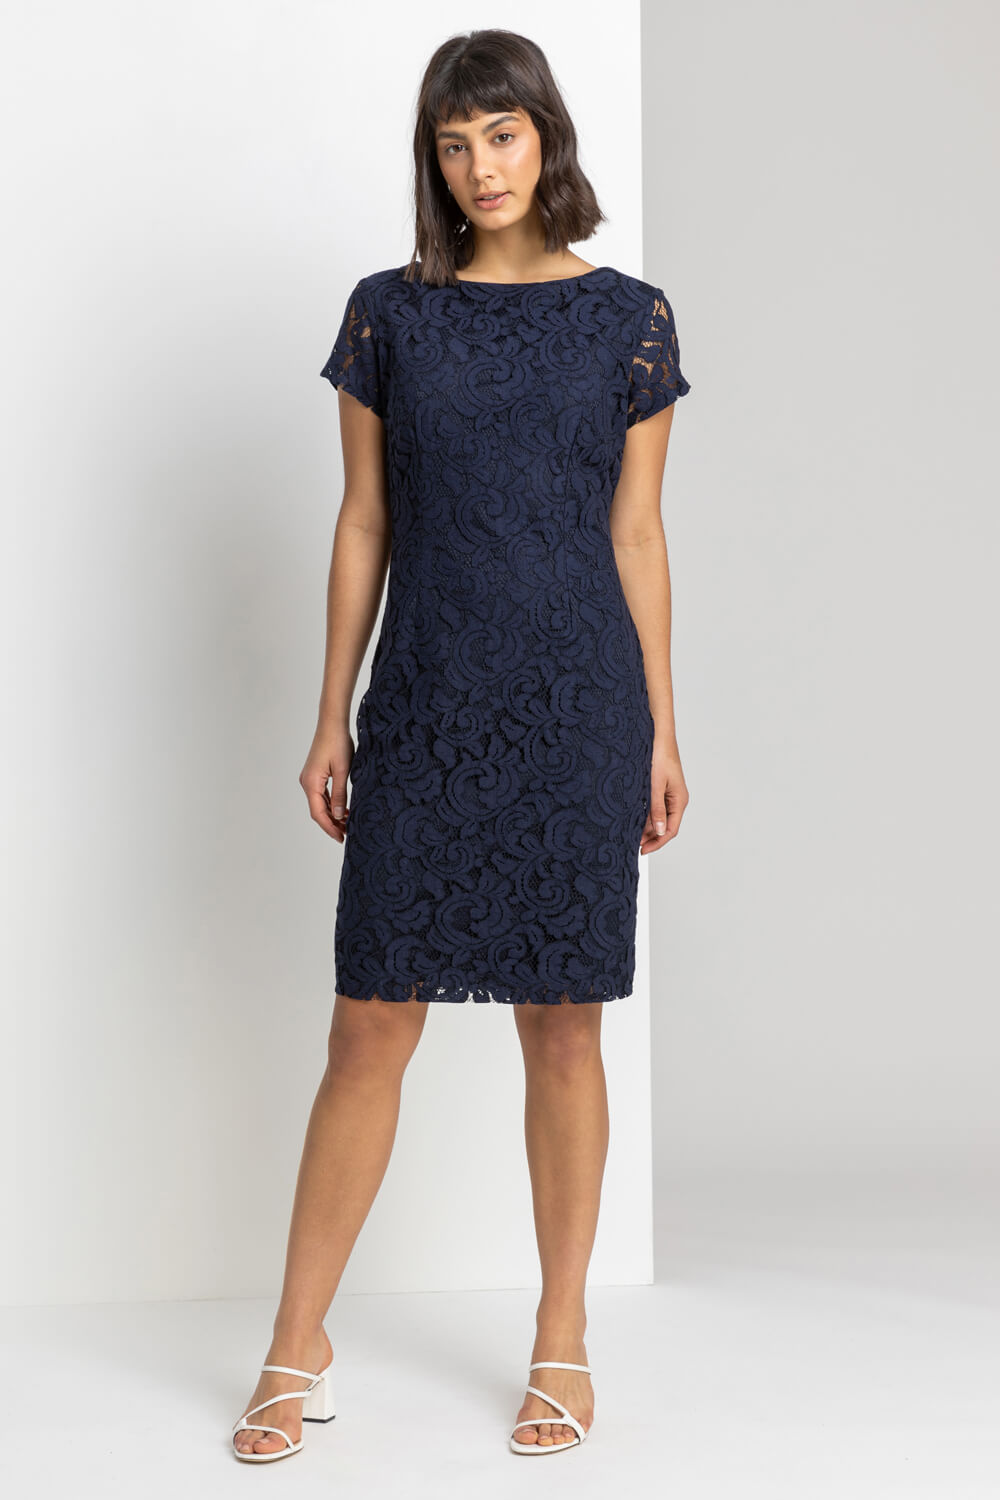 Lace Fitted Dress in Navy - Roman Originals UK